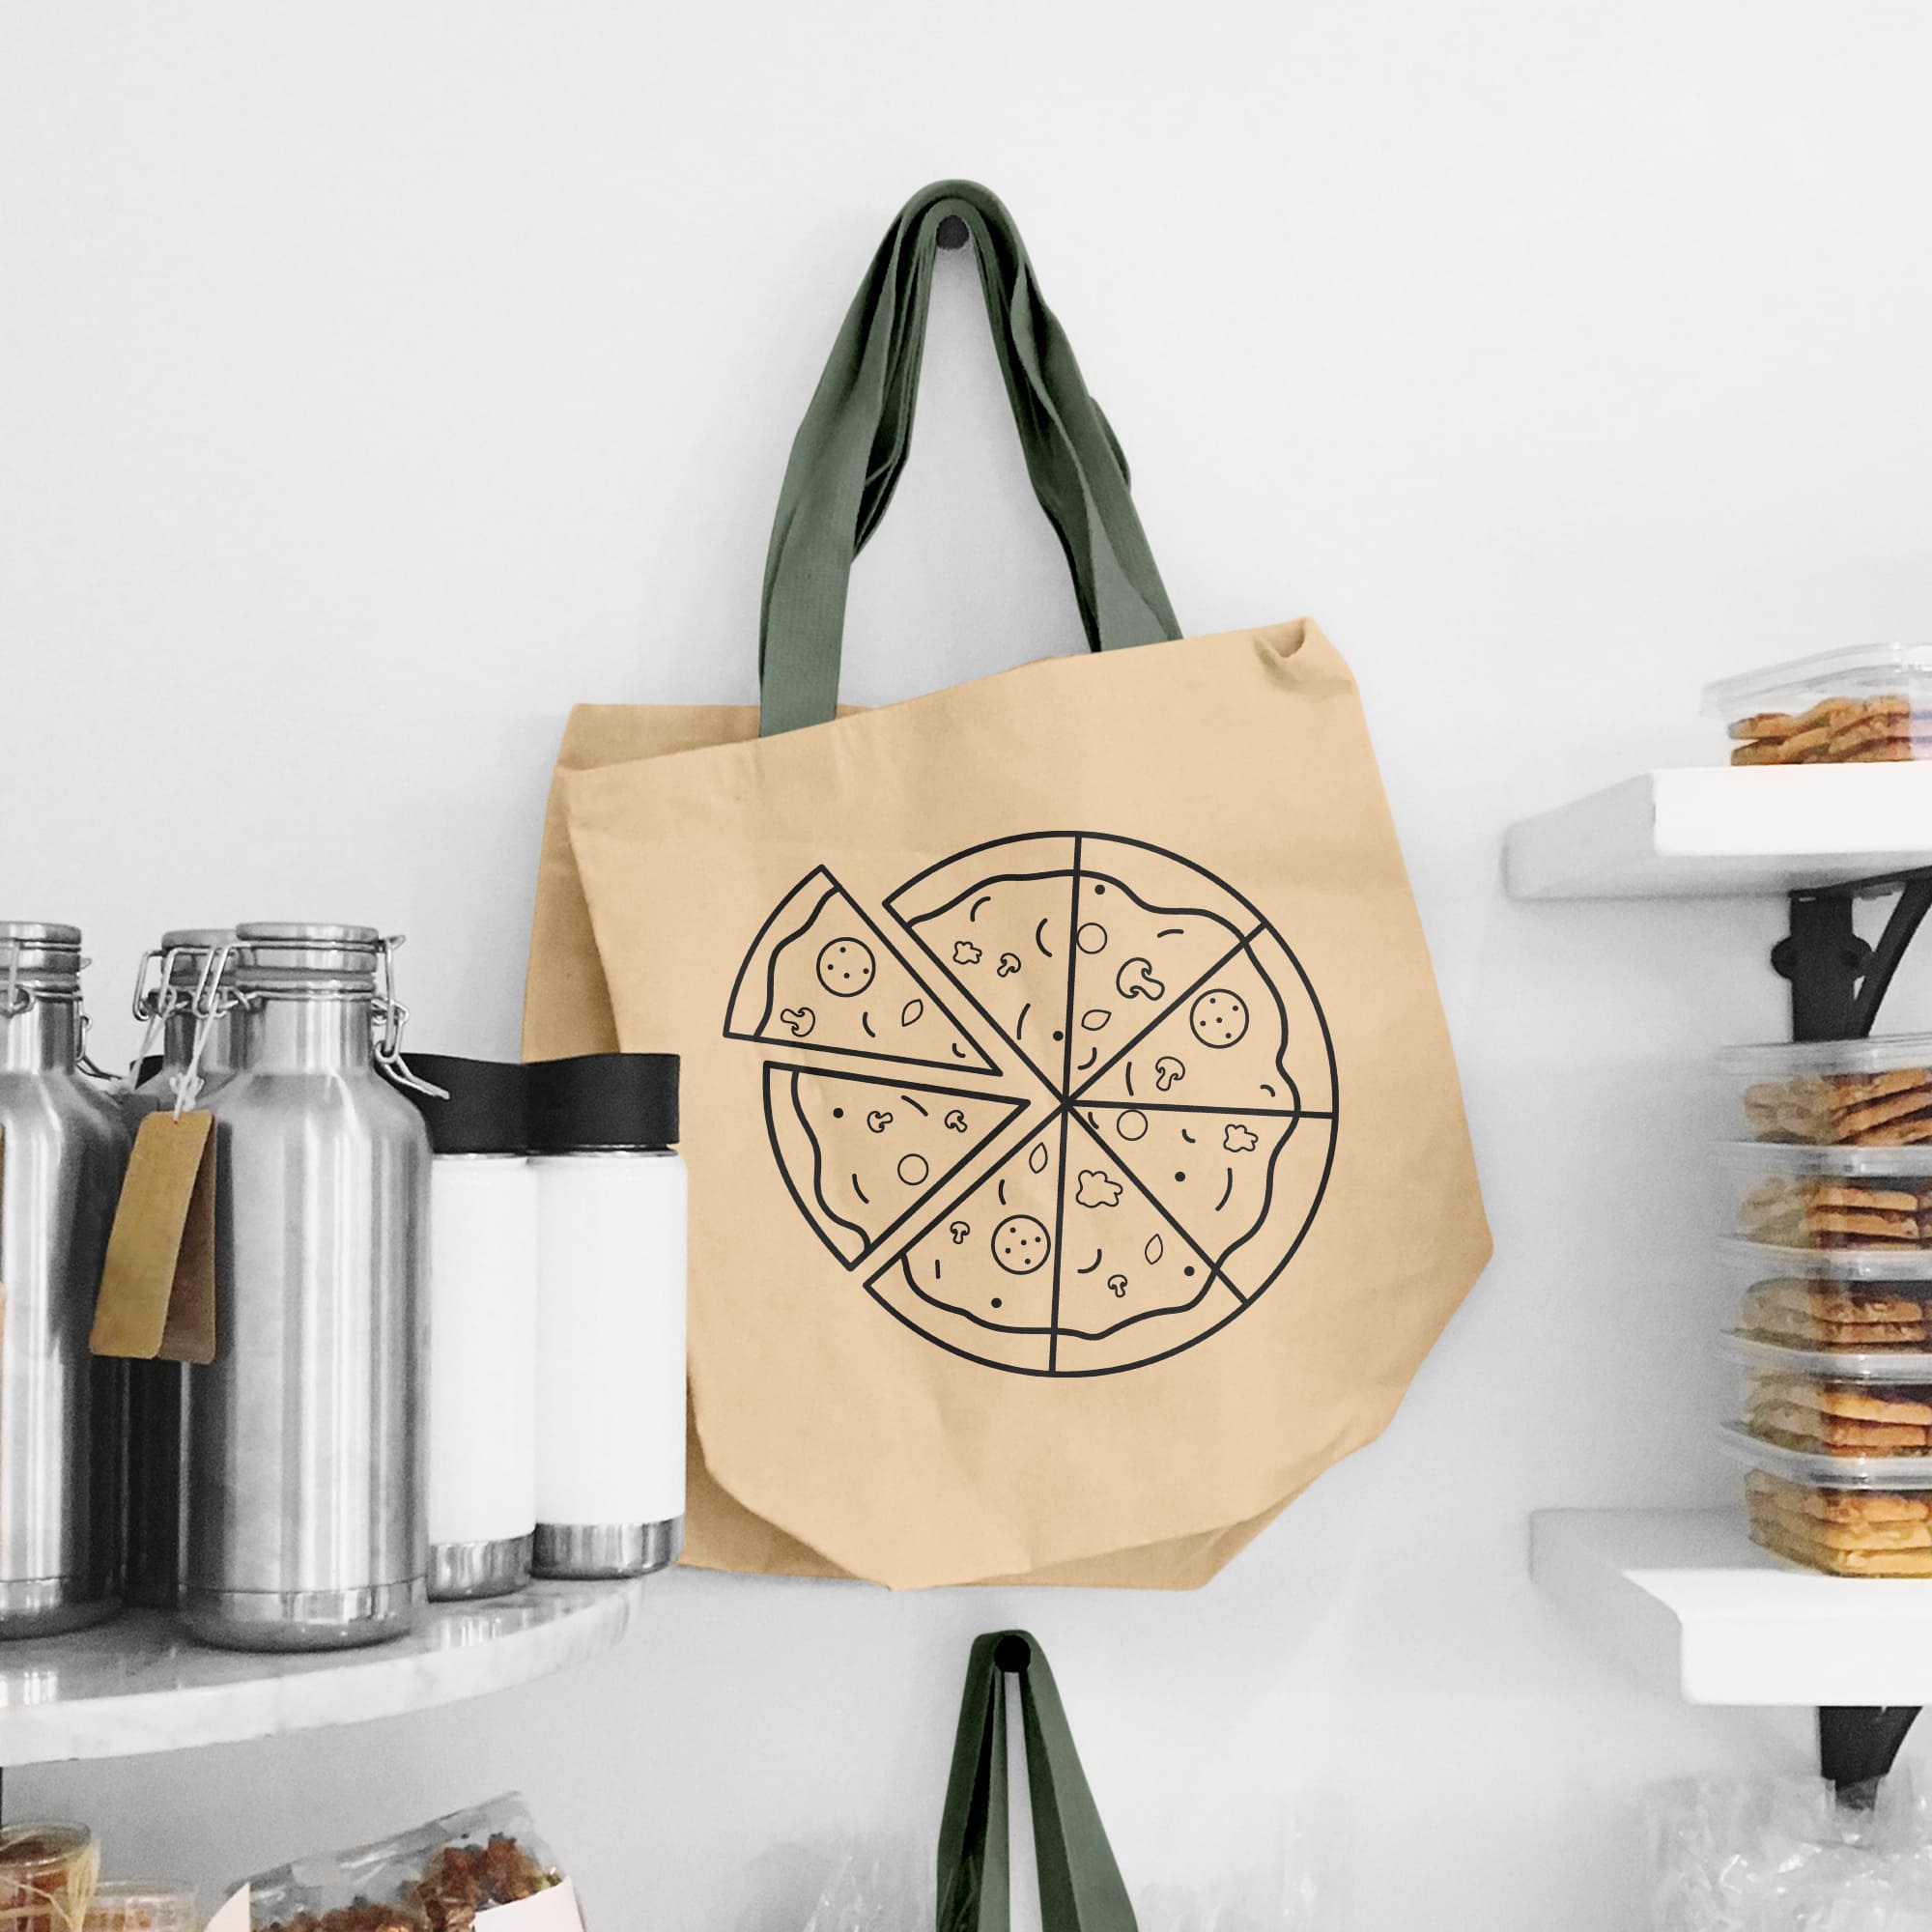 Beige shopping bag with black handle and illustration of pizza.